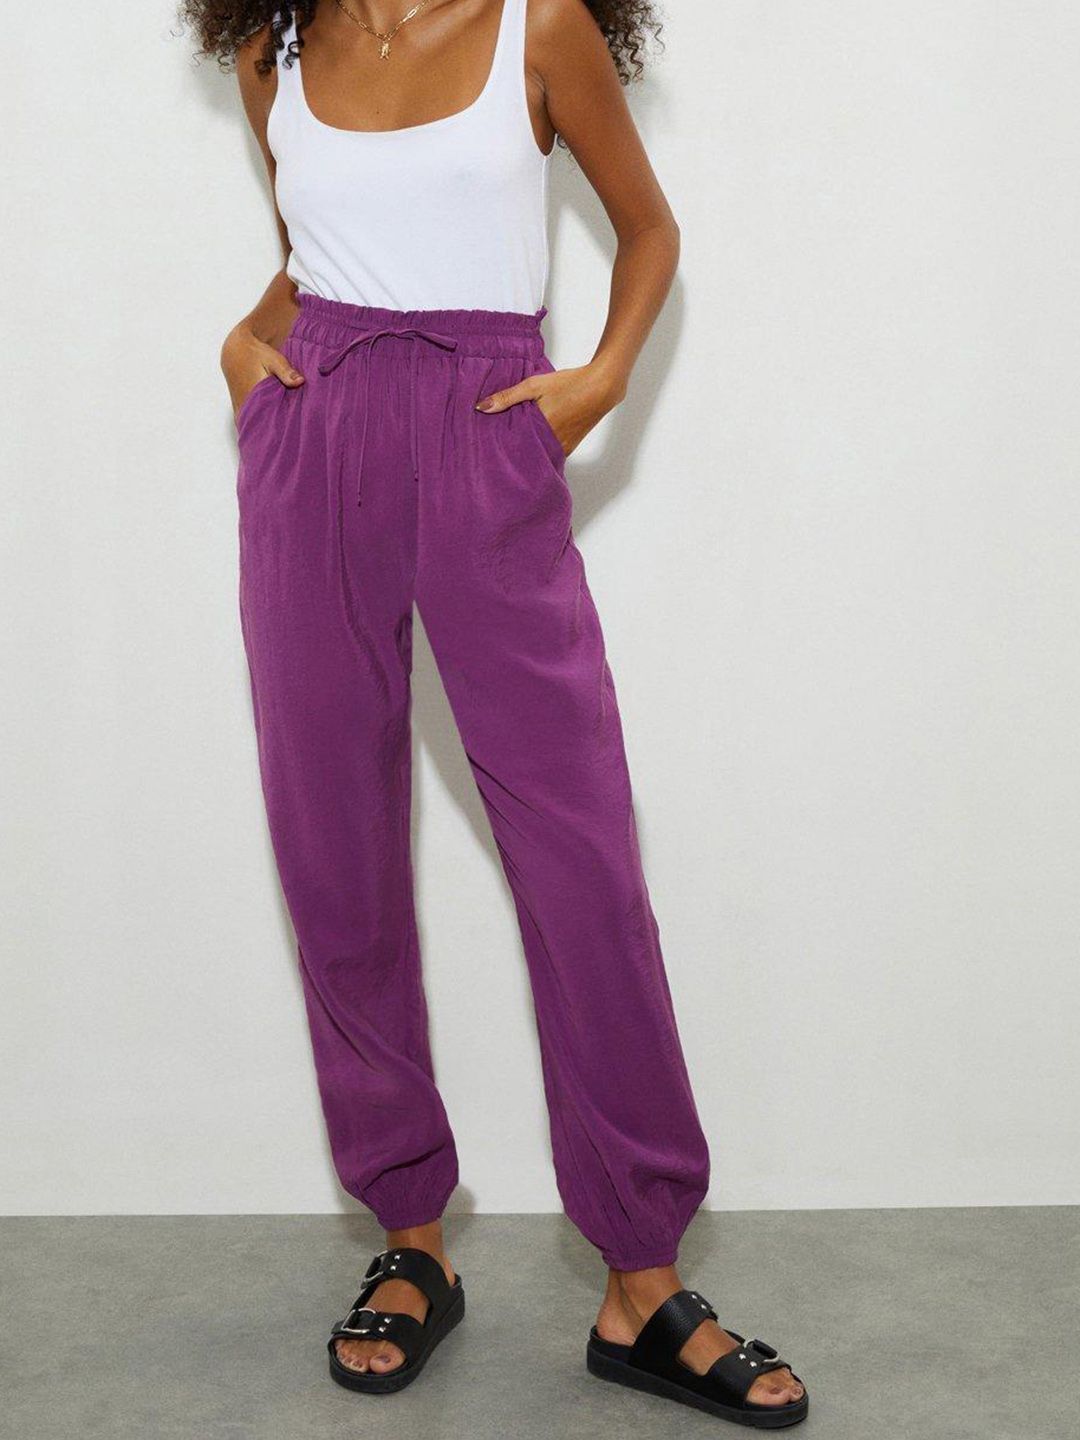 DOROTHY PERKINS Women Purple High-Rise Joggers Price in India